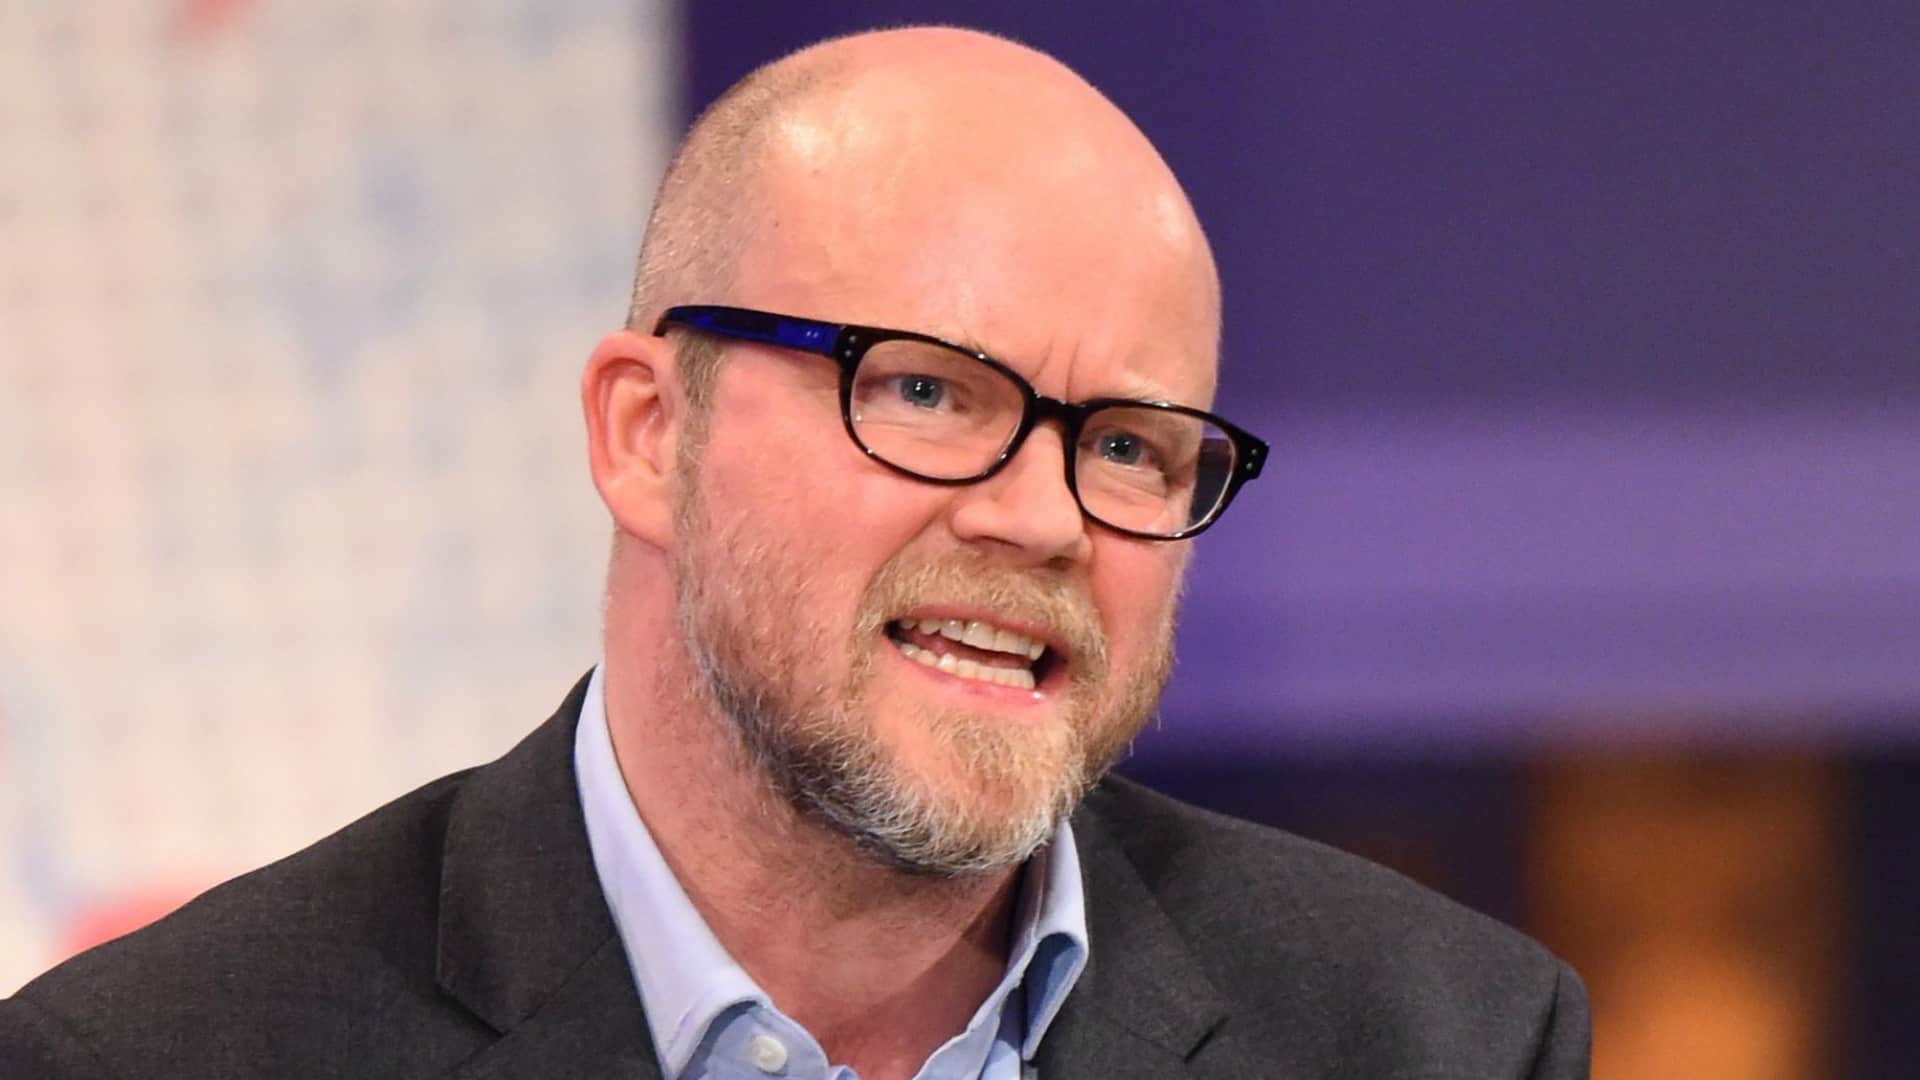 ‘I’m an avid quizzer’: Hilarious entries on Toby Young’s anti-lockdown dating site